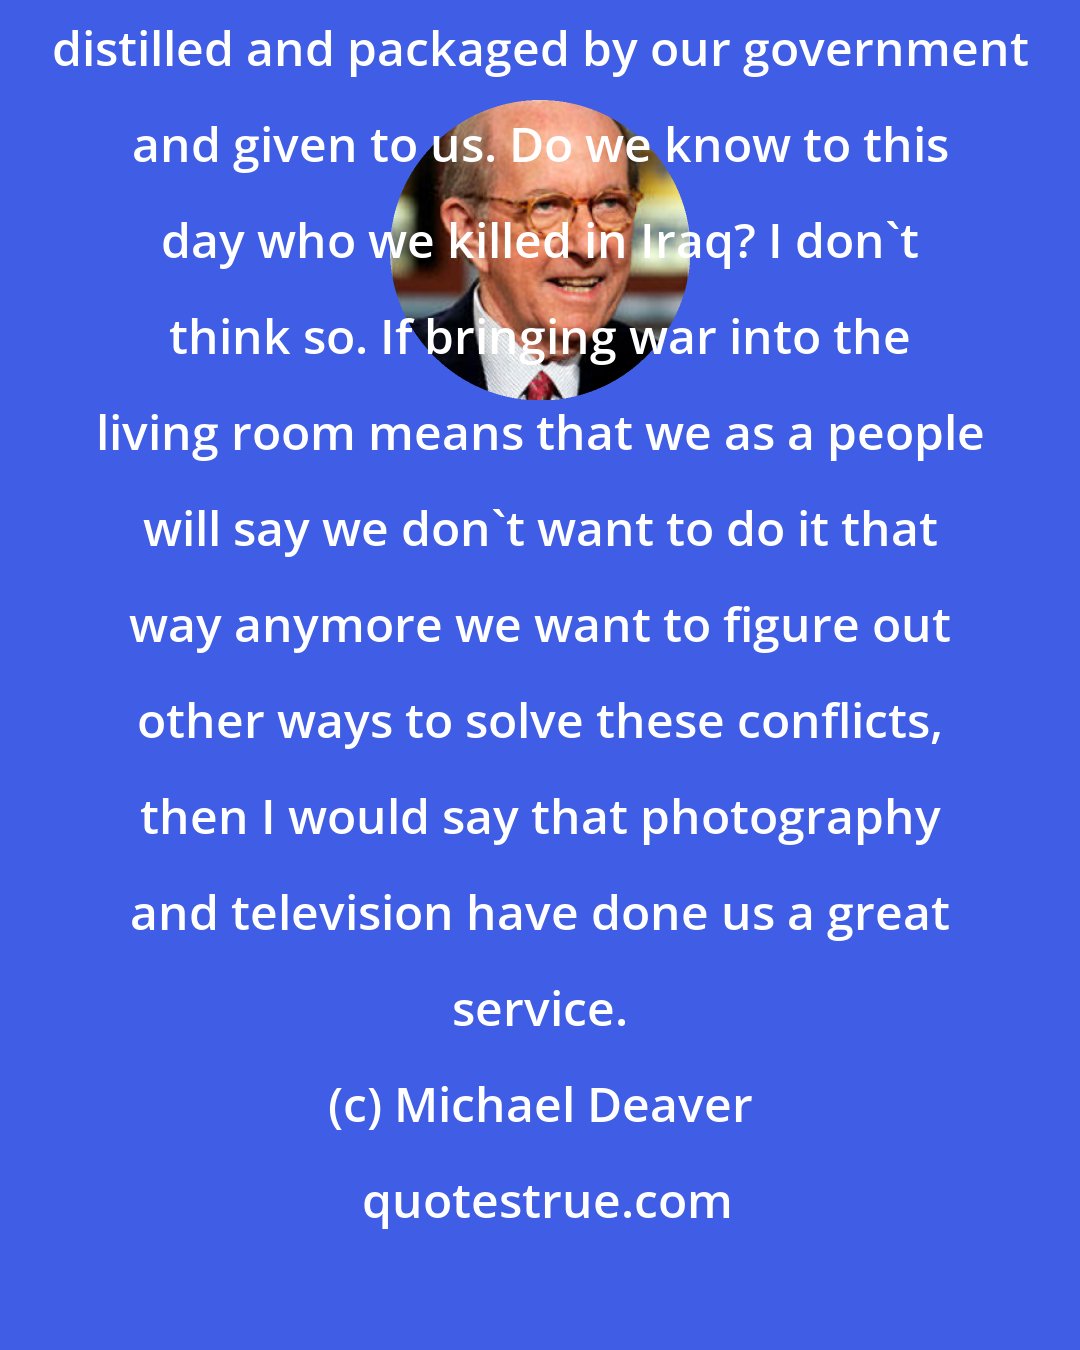 Michael Deaver: I think it's very dangerous for a free society to have all the information distilled and packaged by our government and given to us. Do we know to this day who we killed in Iraq? I don't think so. If bringing war into the living room means that we as a people will say we don't want to do it that way anymore we want to figure out other ways to solve these conflicts, then I would say that photography and television have done us a great service.